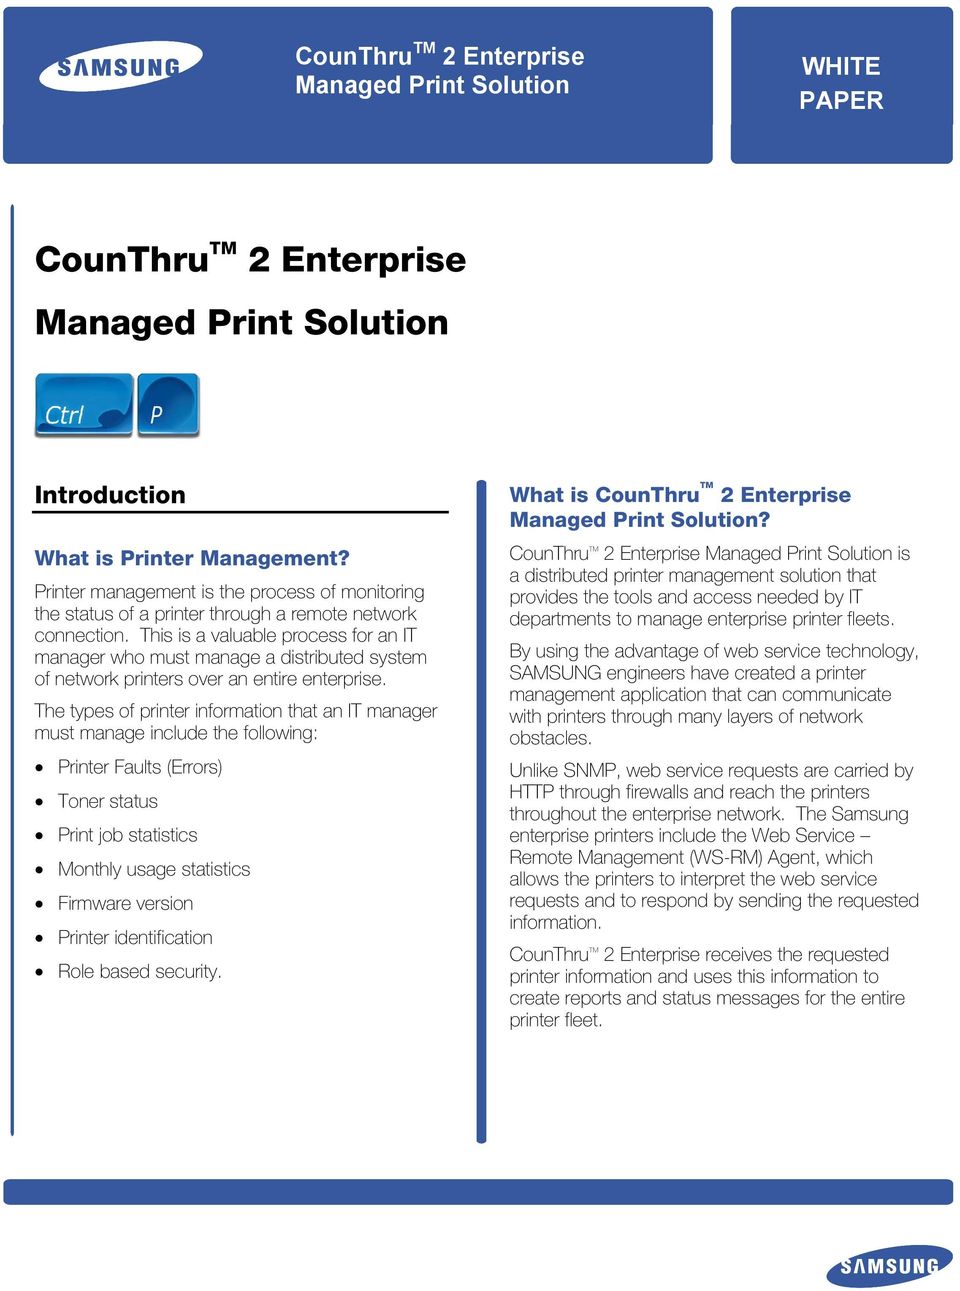 This is a valuable process for an IT manager who must manage a distributed system of network printers over an entire enterprise.